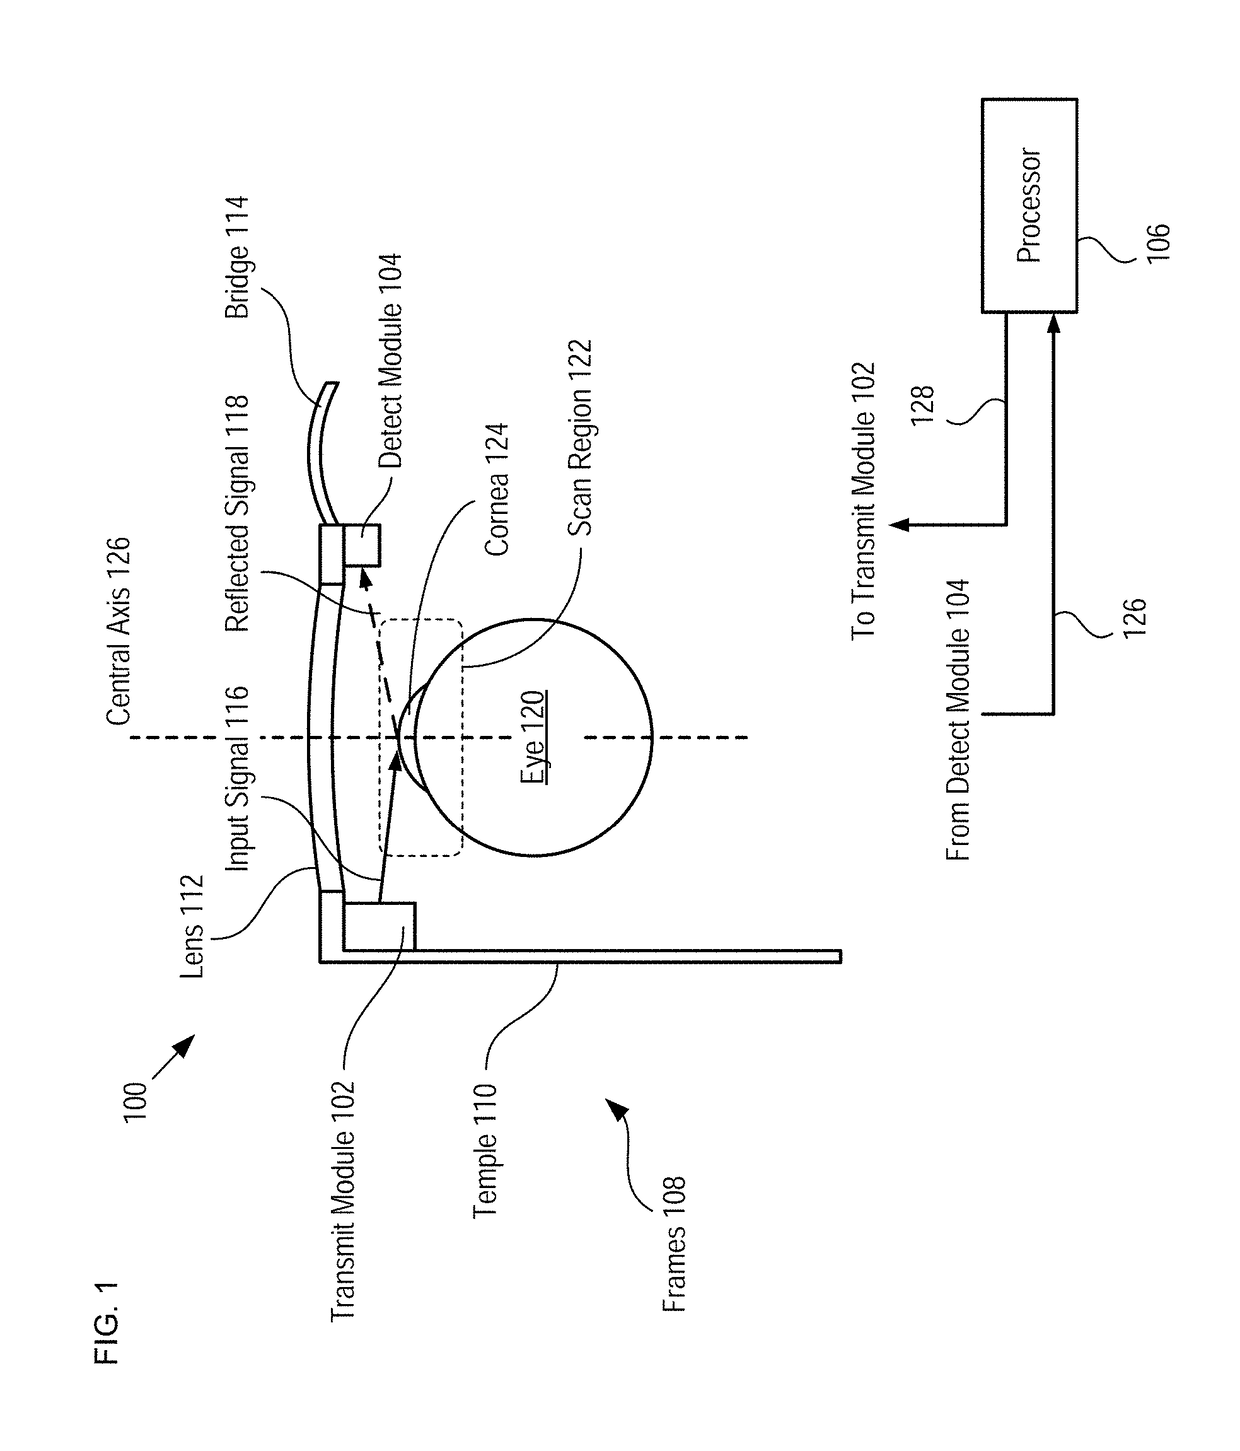 Eye-tracking system and method therefor